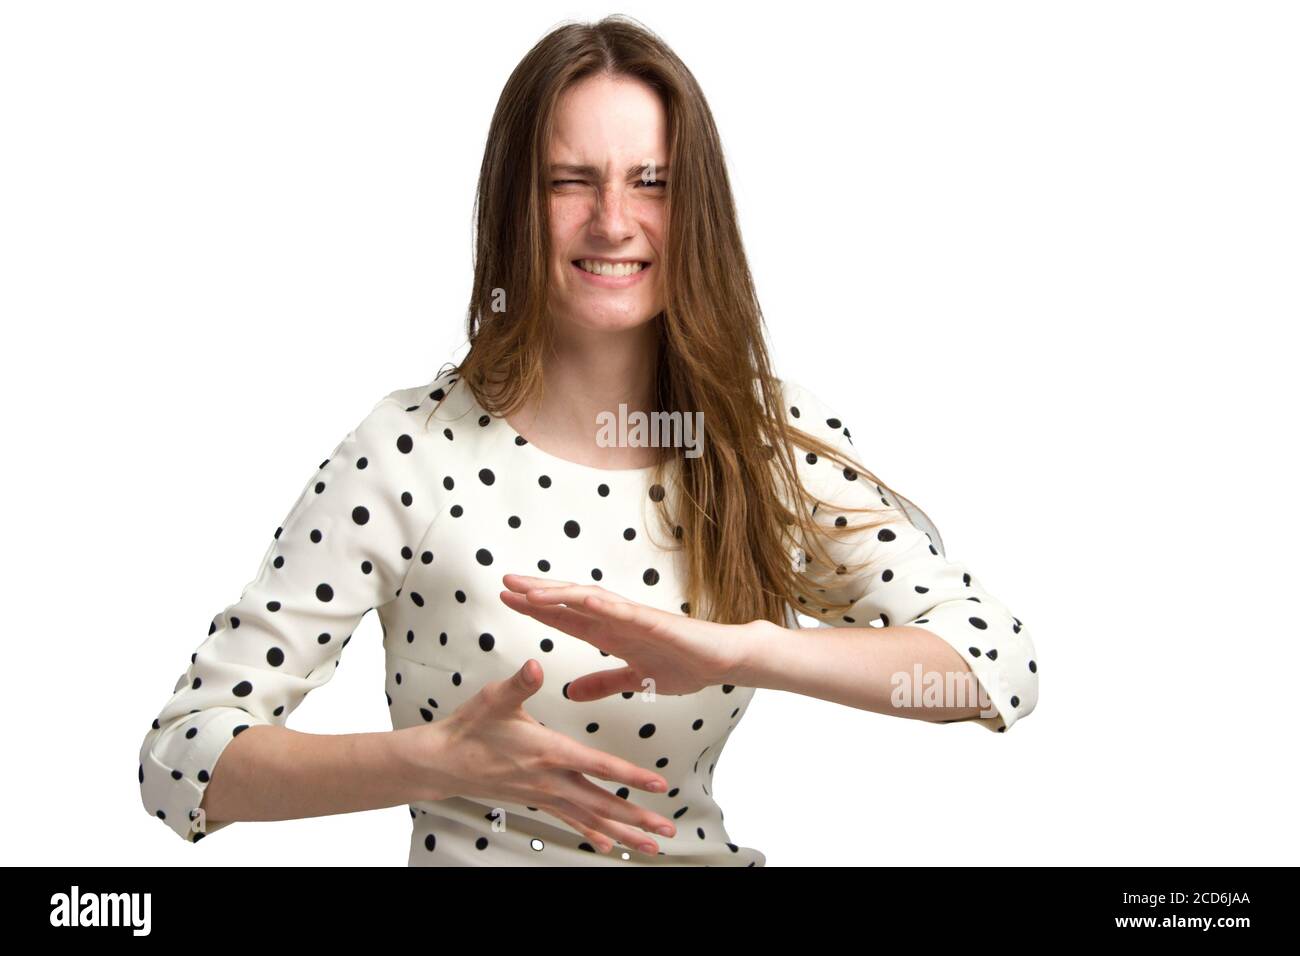 A young woman with long brown hair and a white polka-dot dress. with a discontented tense emotional face. holds his hands in front of him horizontally parallel to the palm. isolate on white Stock Photo